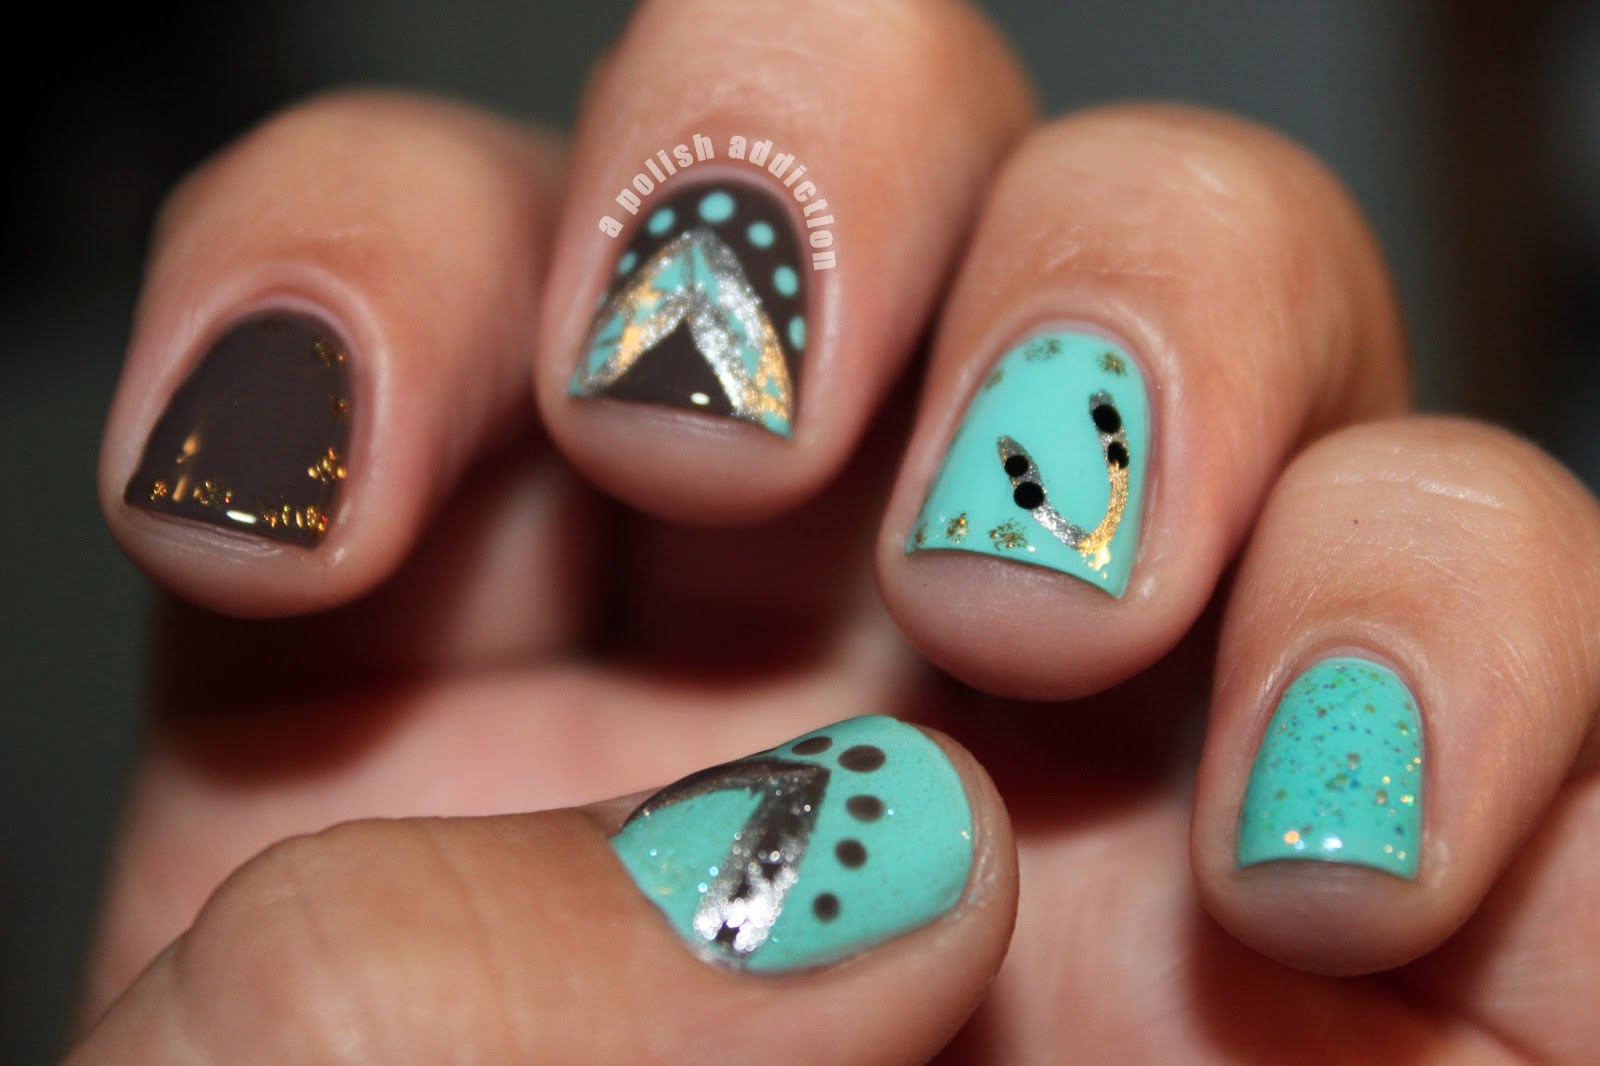 Western Country Nail Art - wide 4